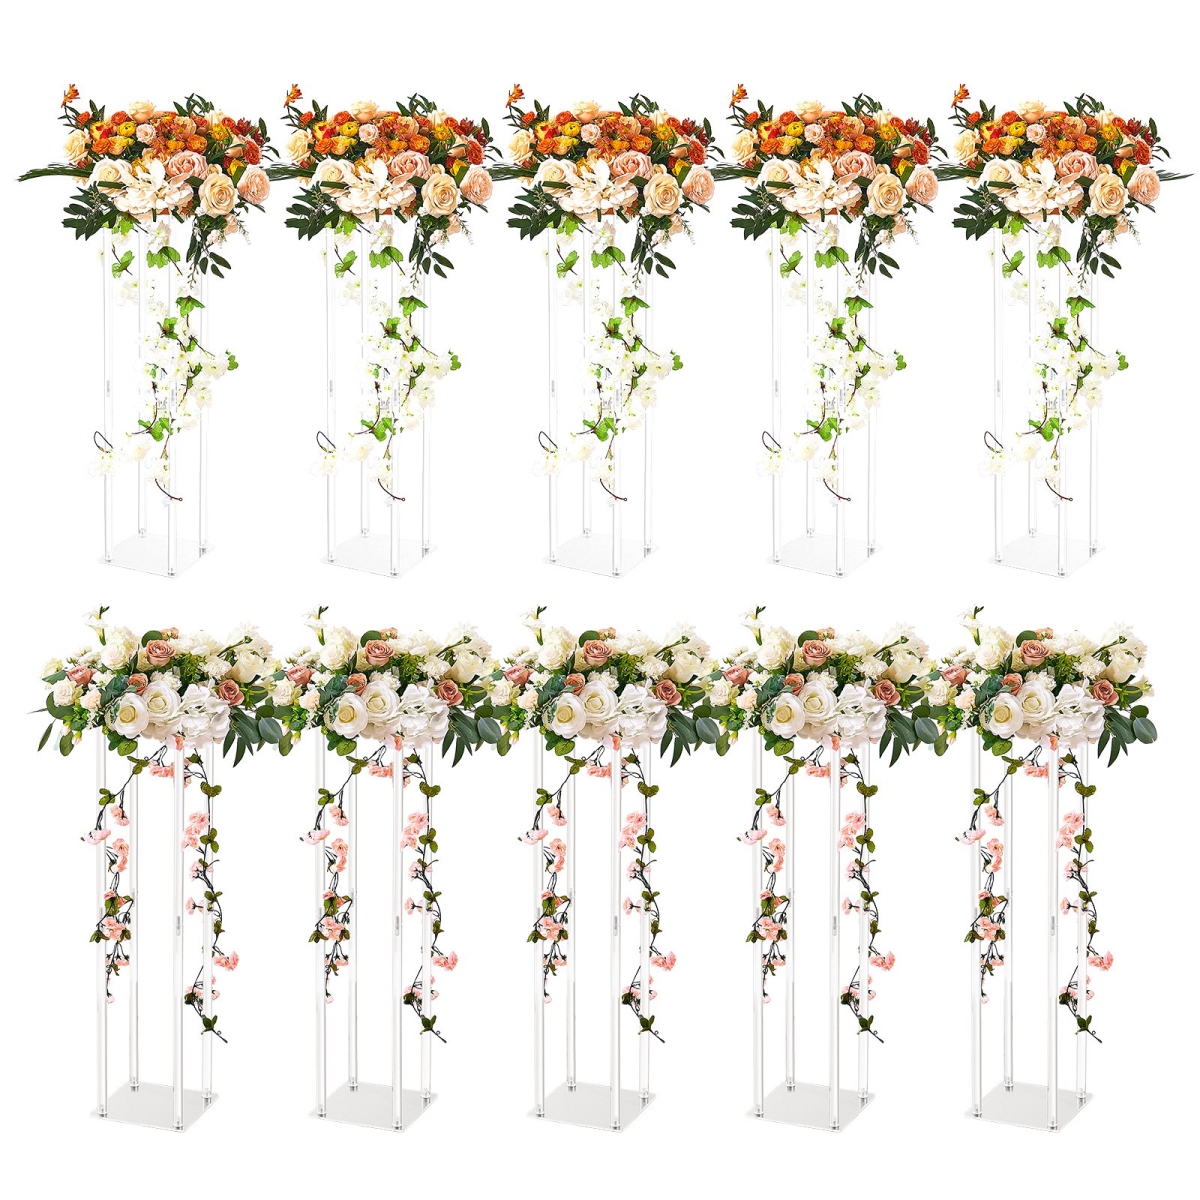 Picture of Vevor HLHJLFTJXKTLPNM7WV0 23.6 in. High Wedding Flower Stand with Acrylic Laminate - 10 Piece